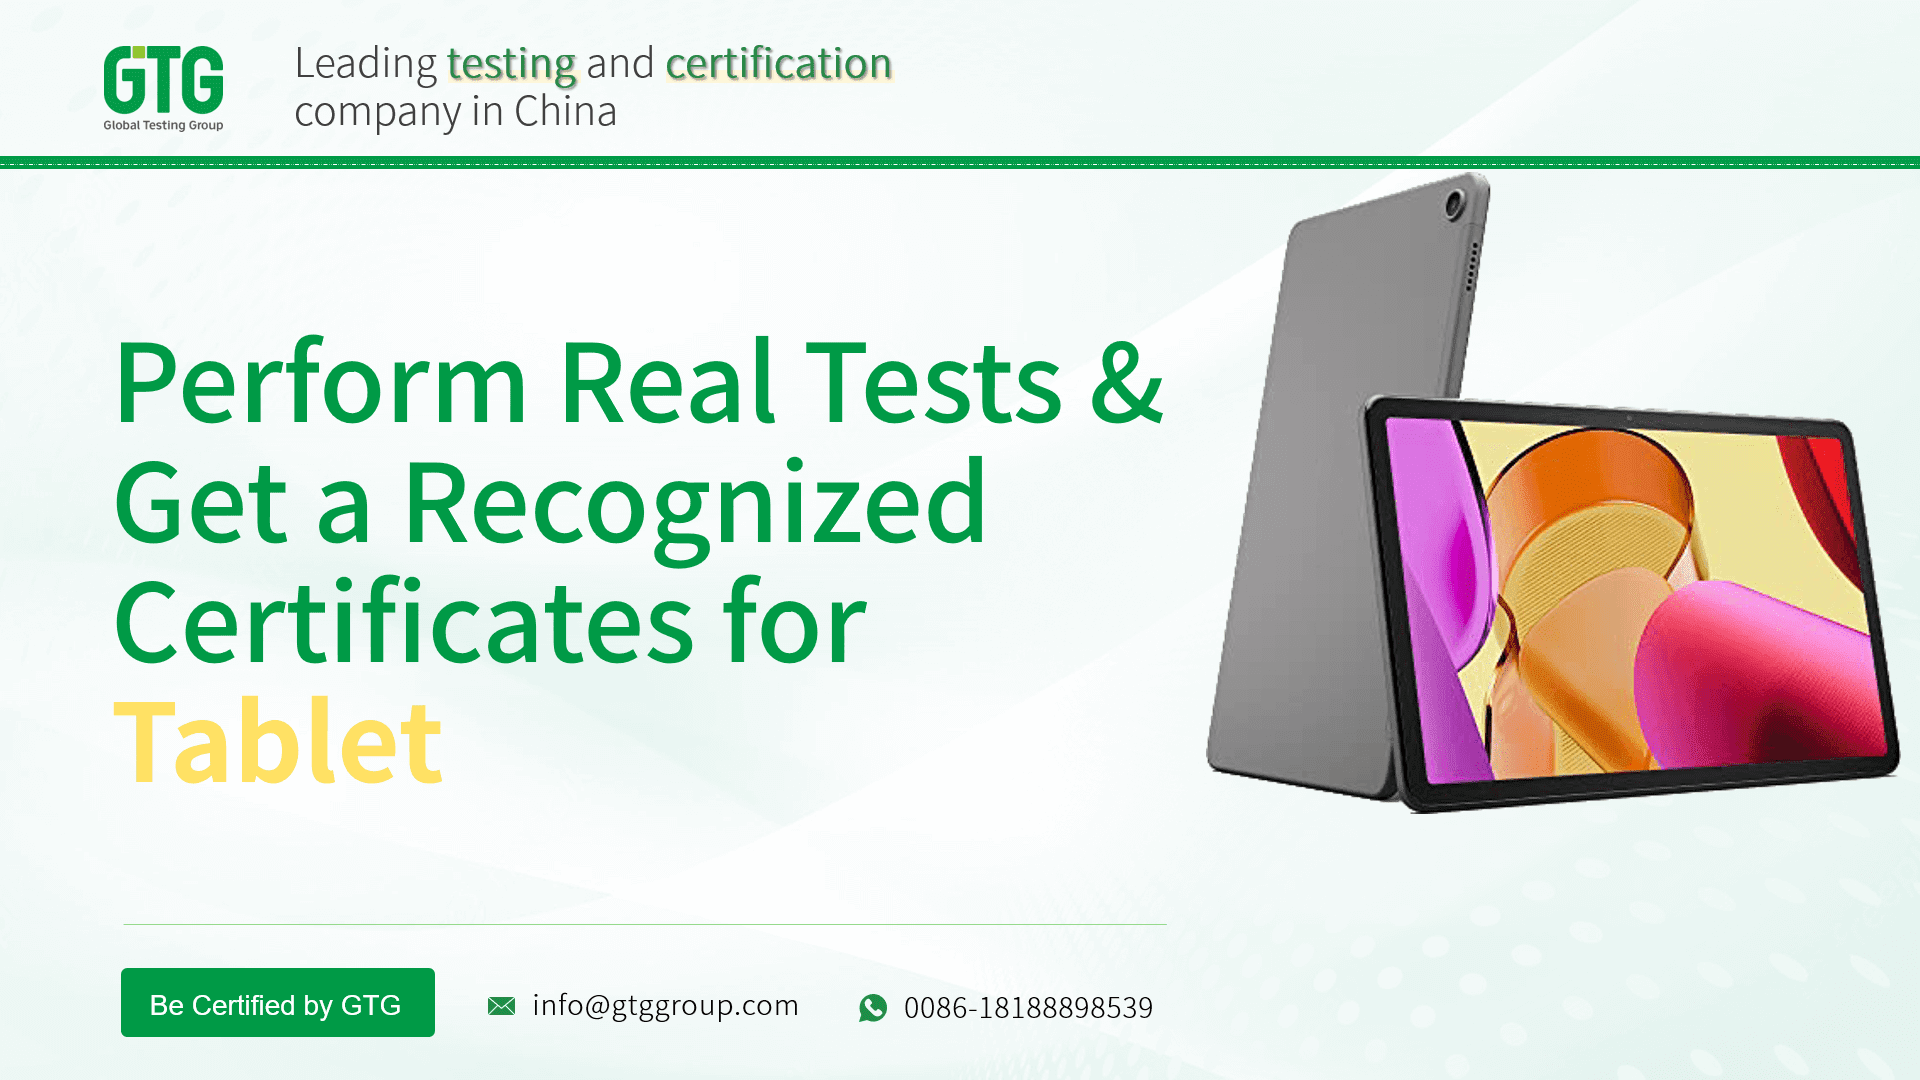 Get Test Report and Certifications for Tablet from GTG Group